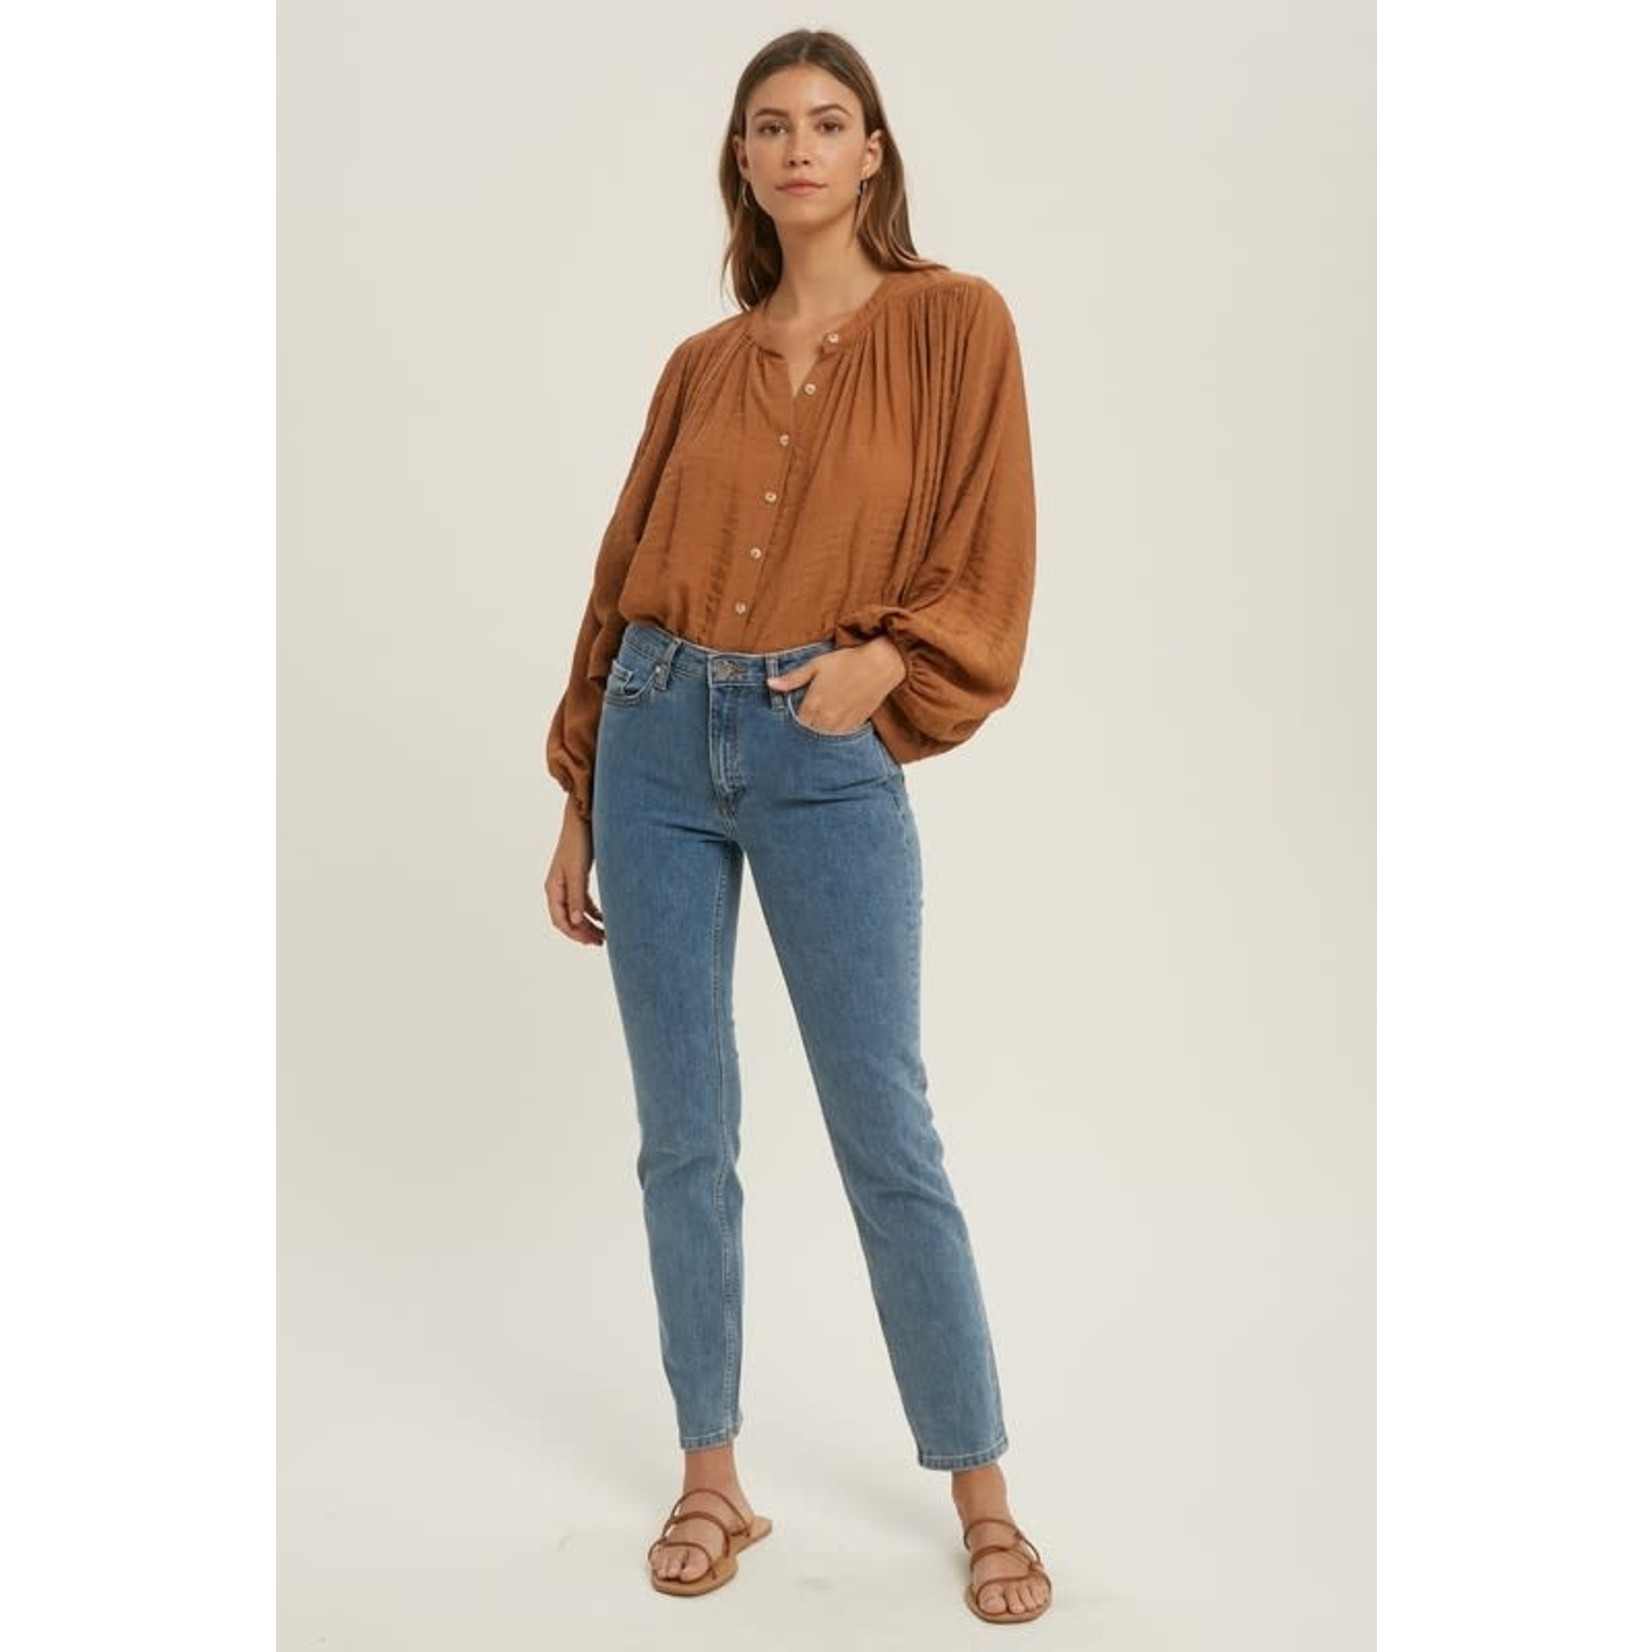 Emily Textured Button Down Top